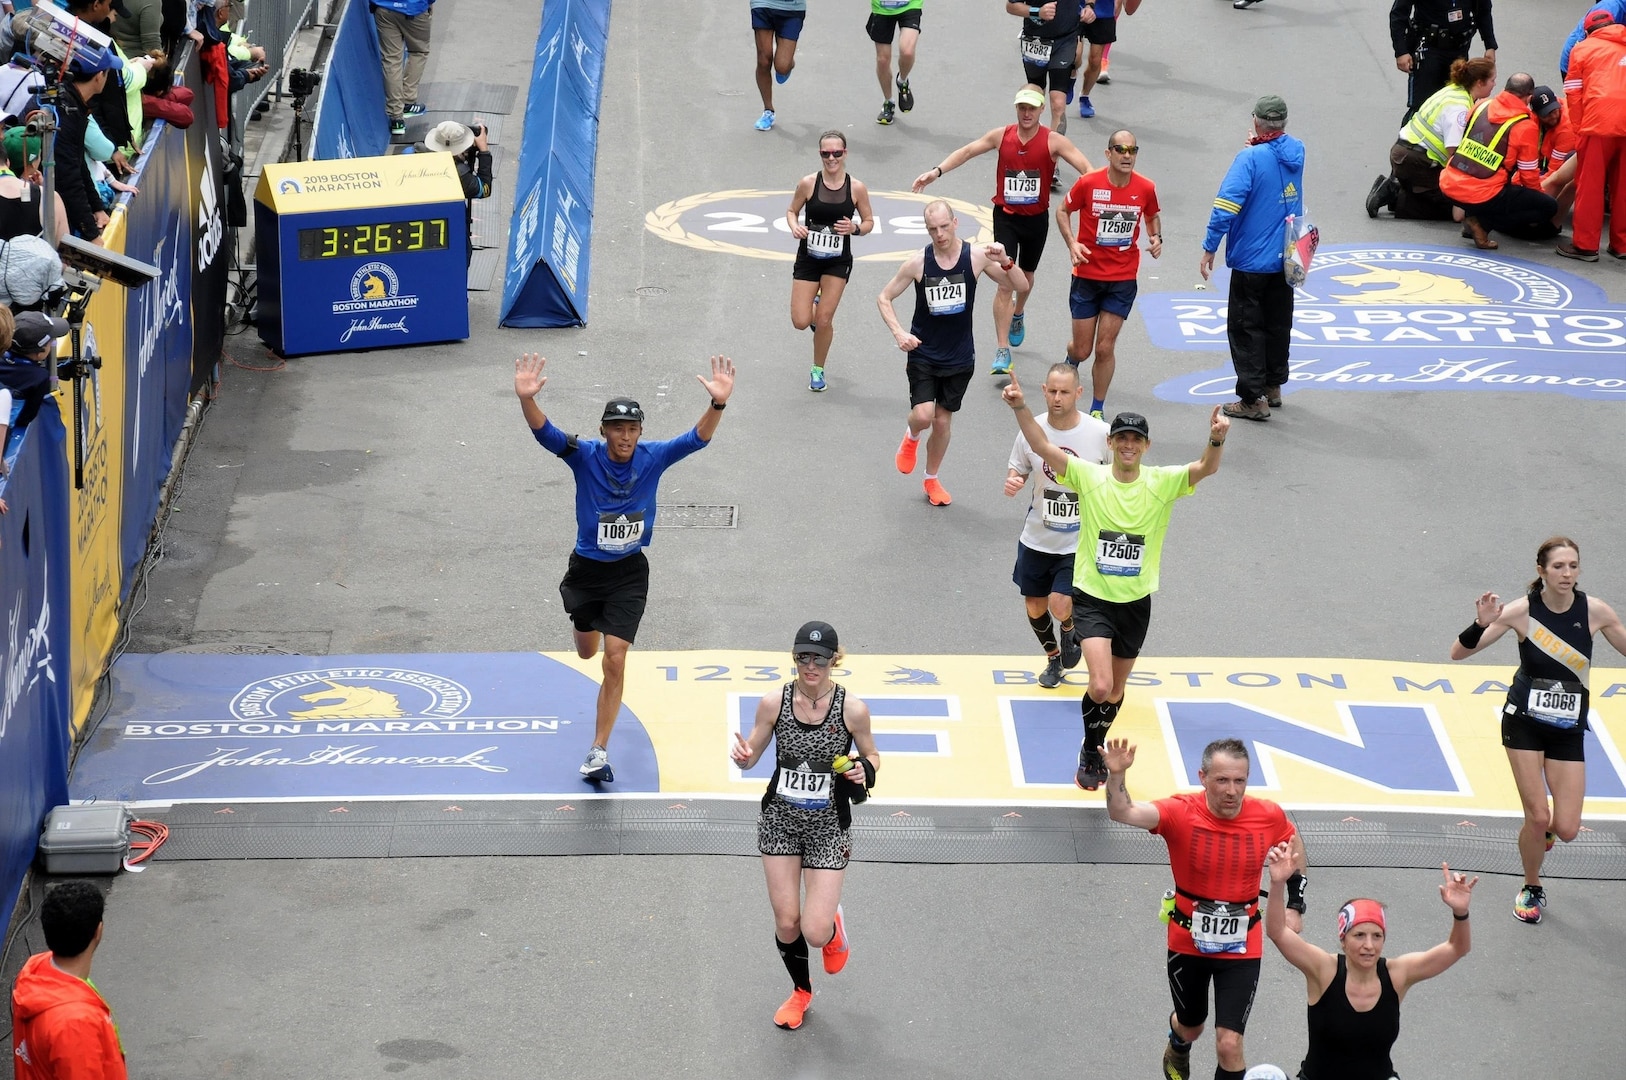 Lt. Col. (Dr.) Trevor Lim (left), 59th Medical Wing Radiation Oncology chief, completed the 2019 Boston Marathon April 15 in Boston, Massachusetts. Lim completed the race in the top 28 percent of overall finishers with a run time of 3:24:49.